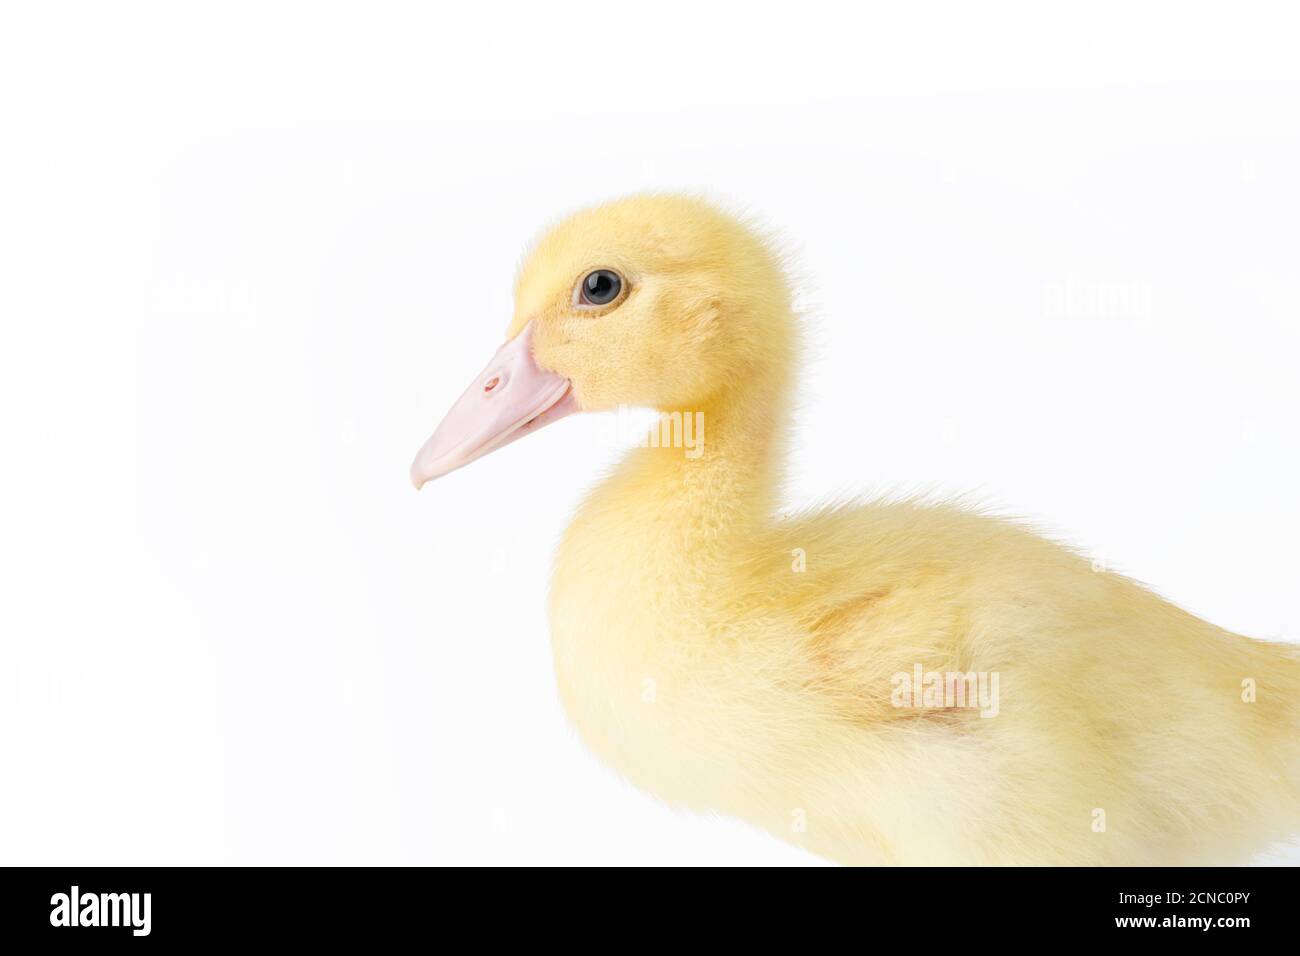 young muscovy duck closeup Stock Photo